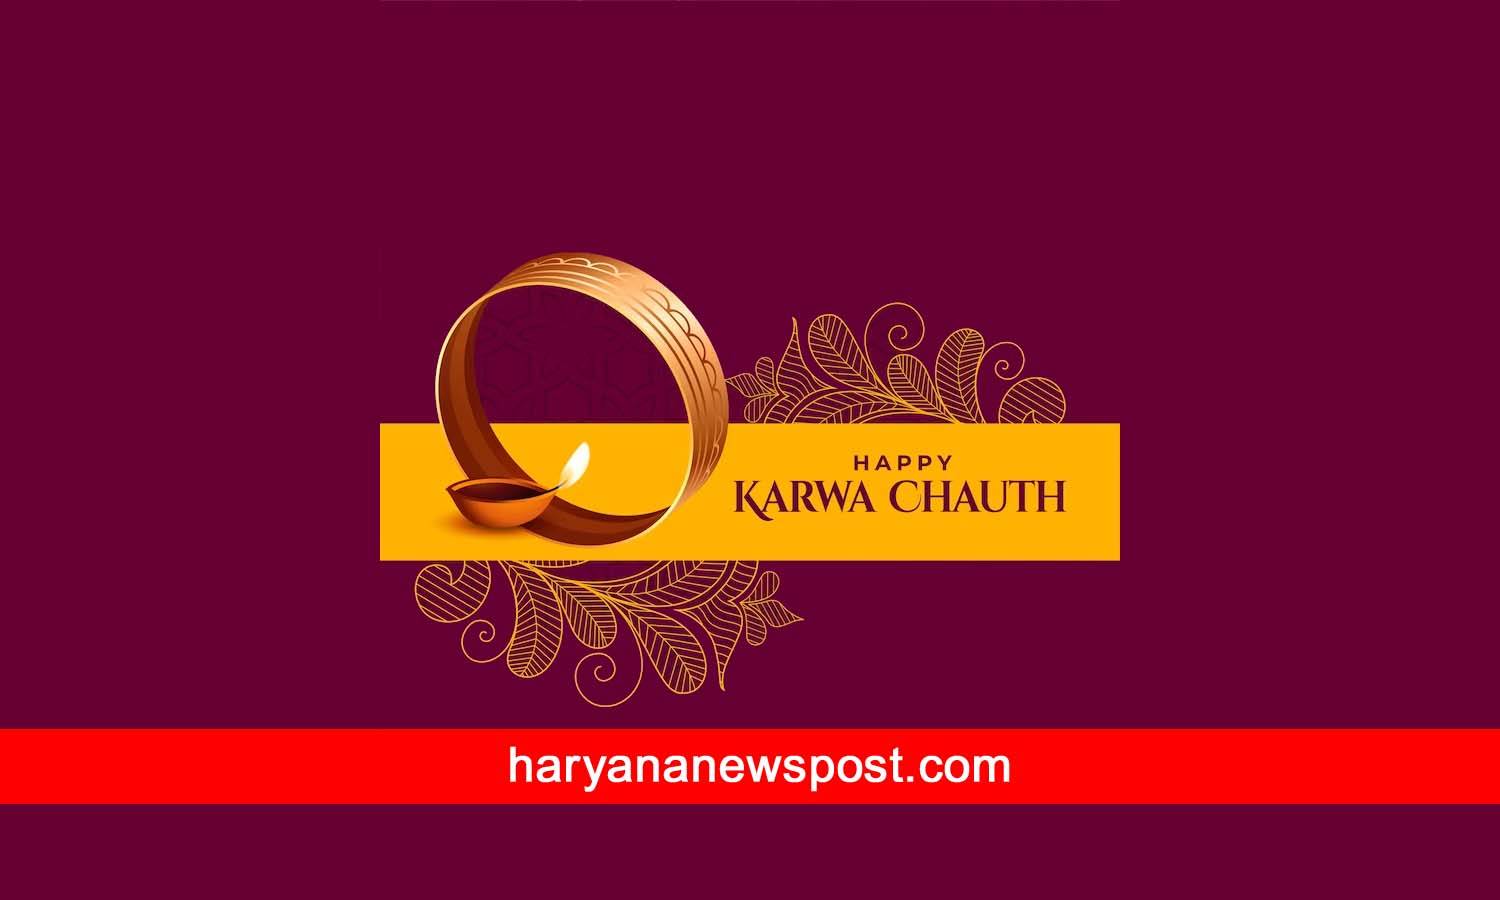 Karwa Chauth Indian army, BSF and military wives messages and wishes, status